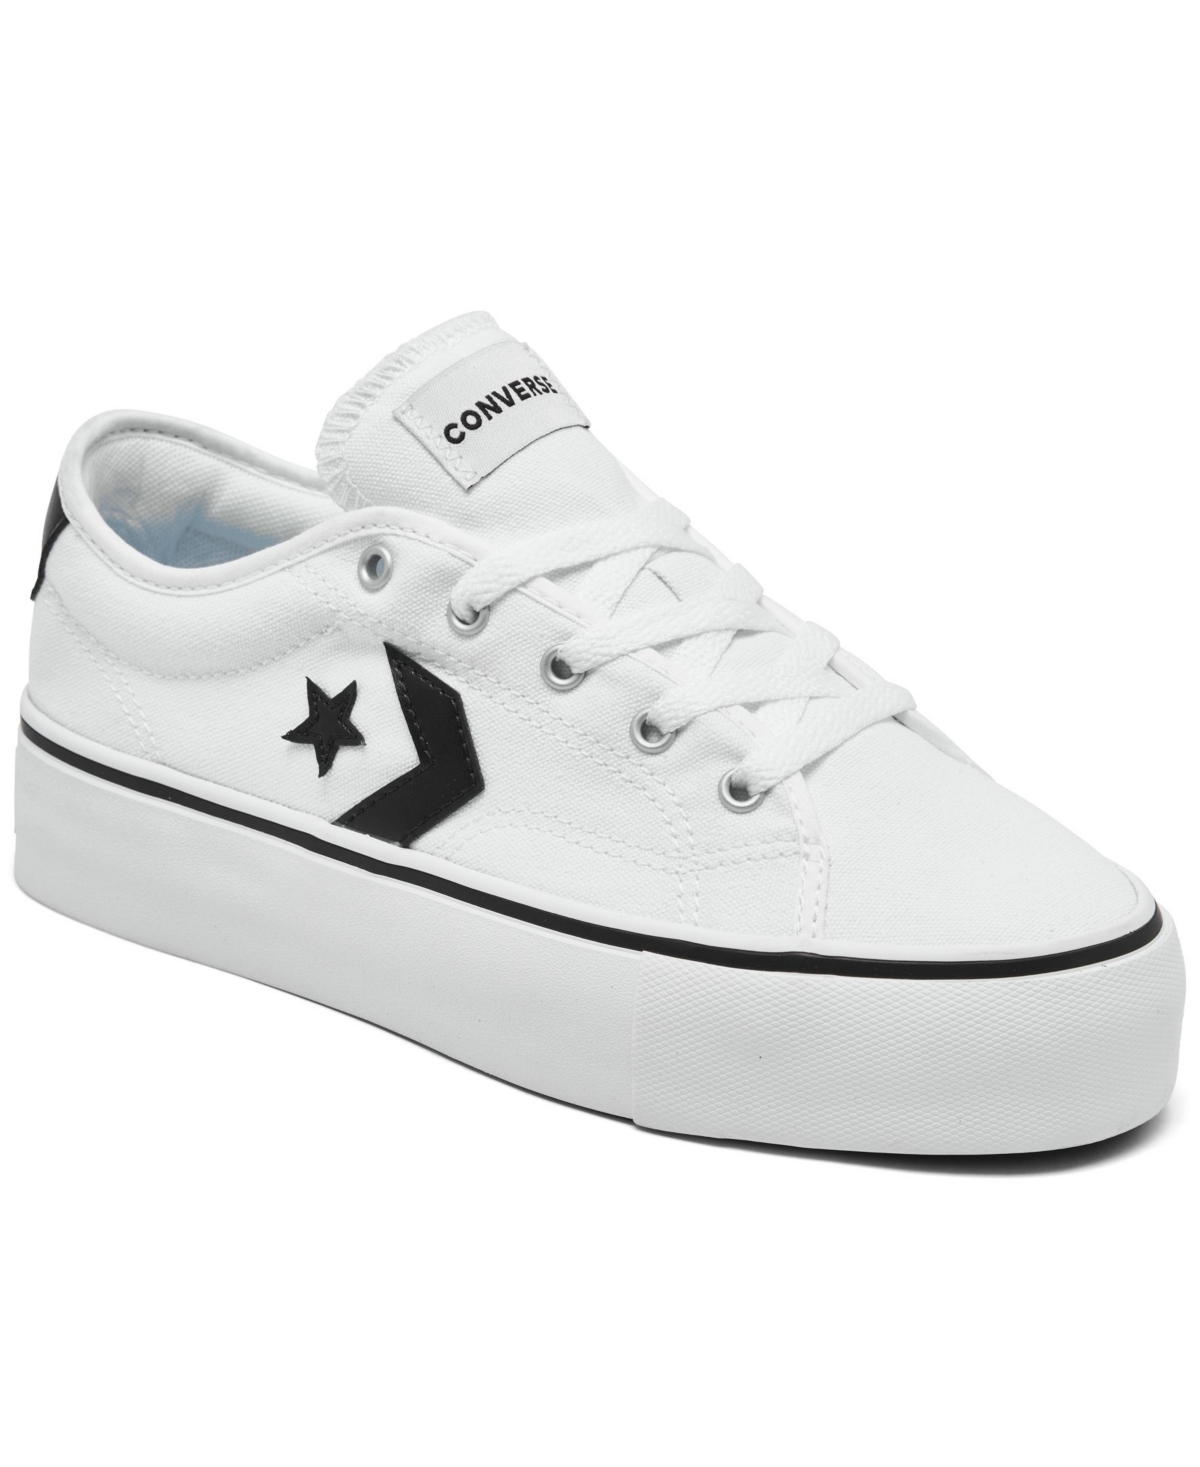 Converse Women's Star Replay Platform Low Top Casual Sneakers from Finish Line